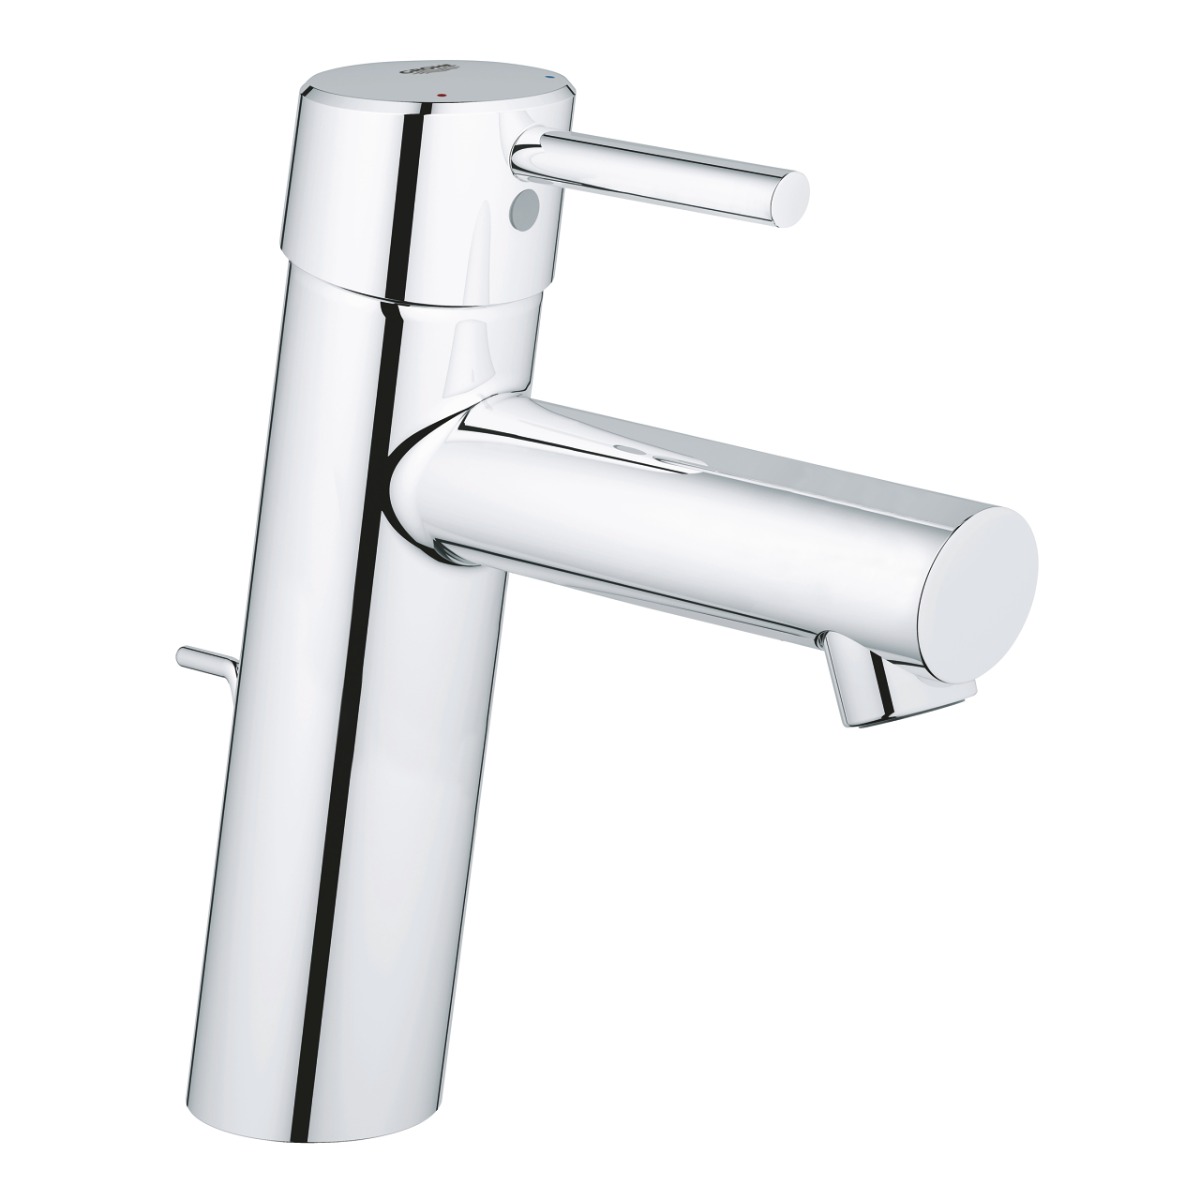 Baterie lavoar inaltime medie Grohe Concetto New,crom,furtune flexibile-23450001 baterii-lux.ro/